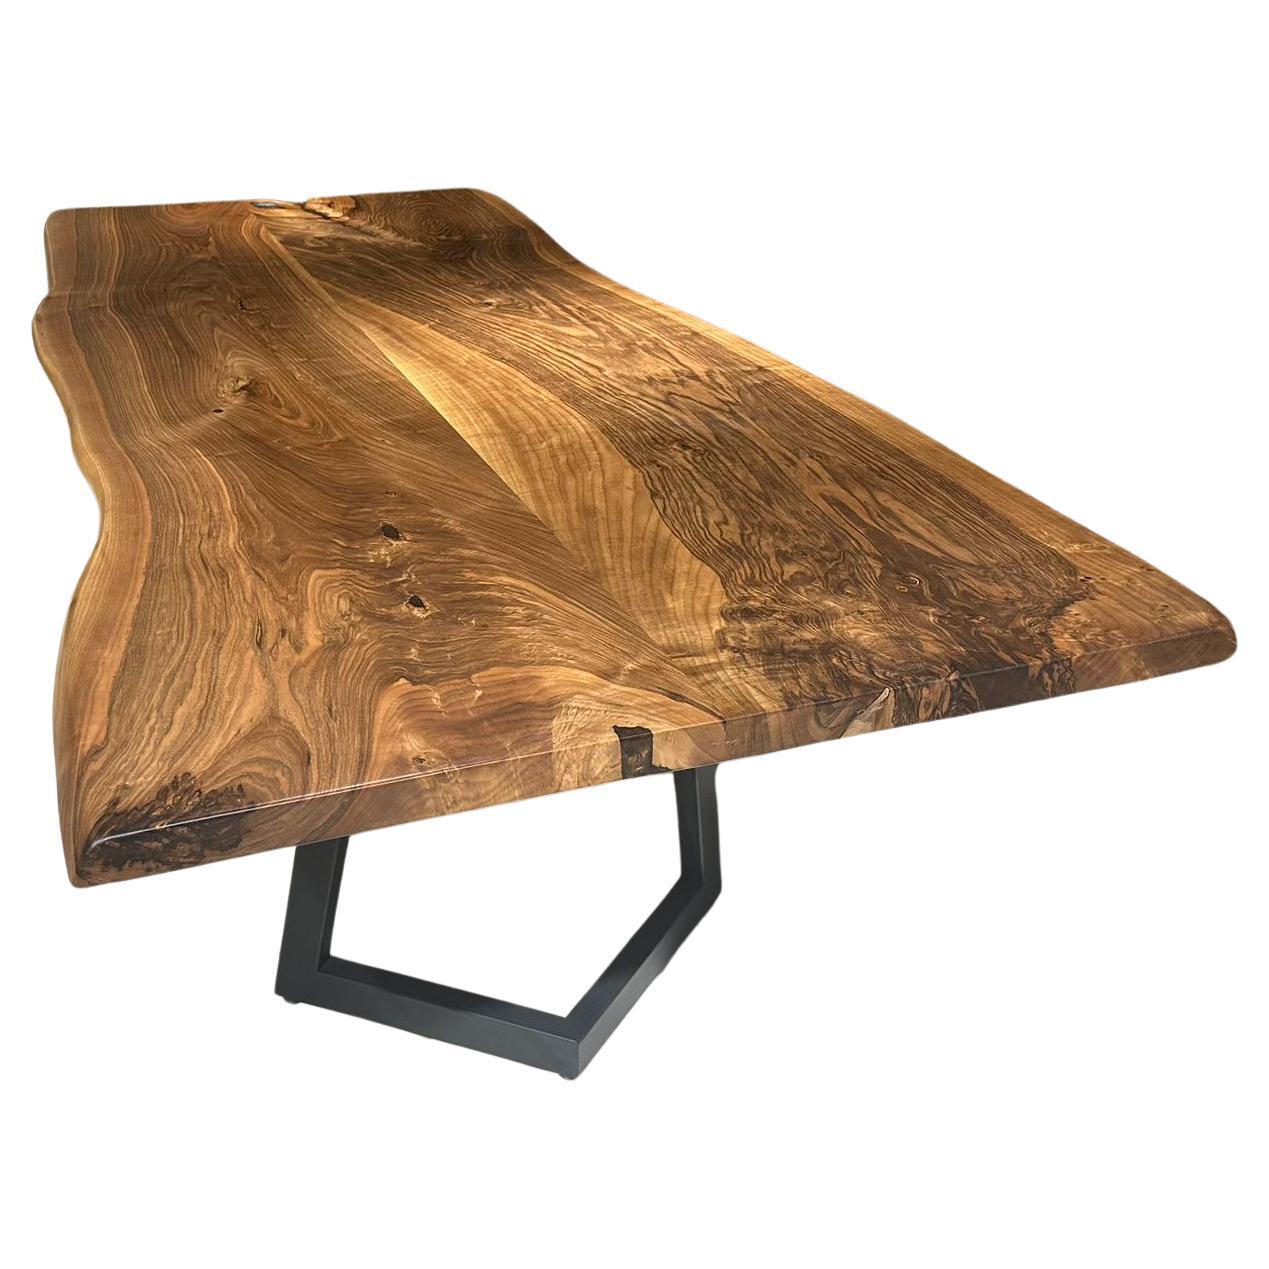 Walnut Live Edge Wooden Kitchen Table For Sale